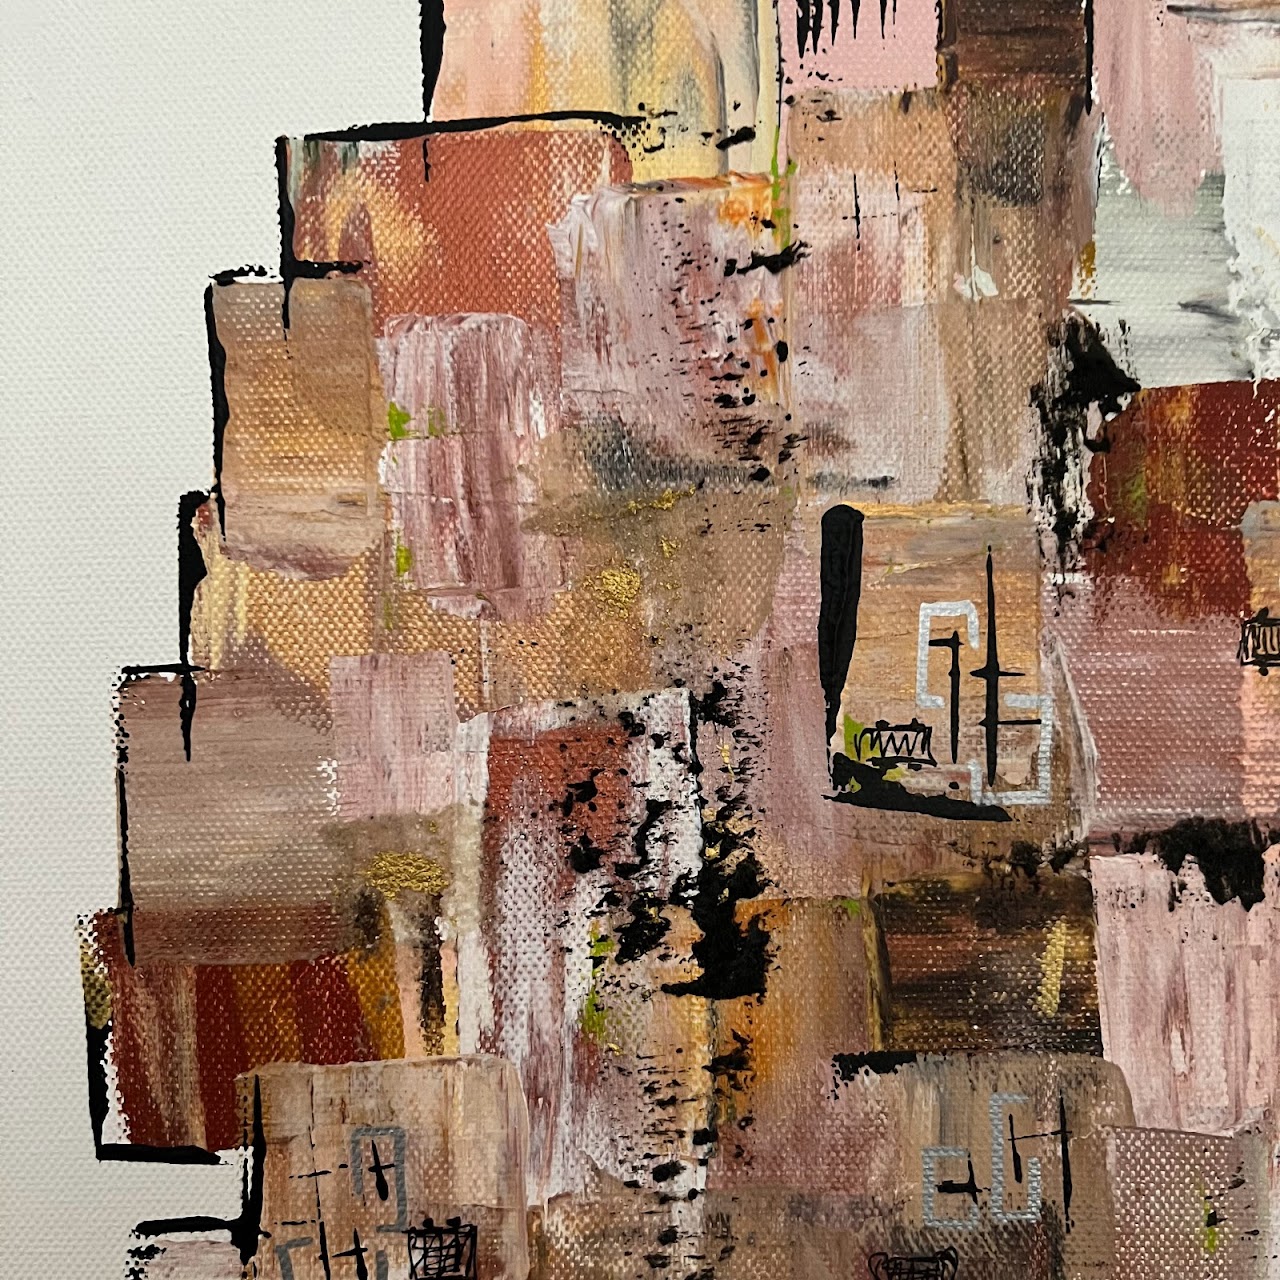 Abstract Cityscape Signed Acrylic Painting